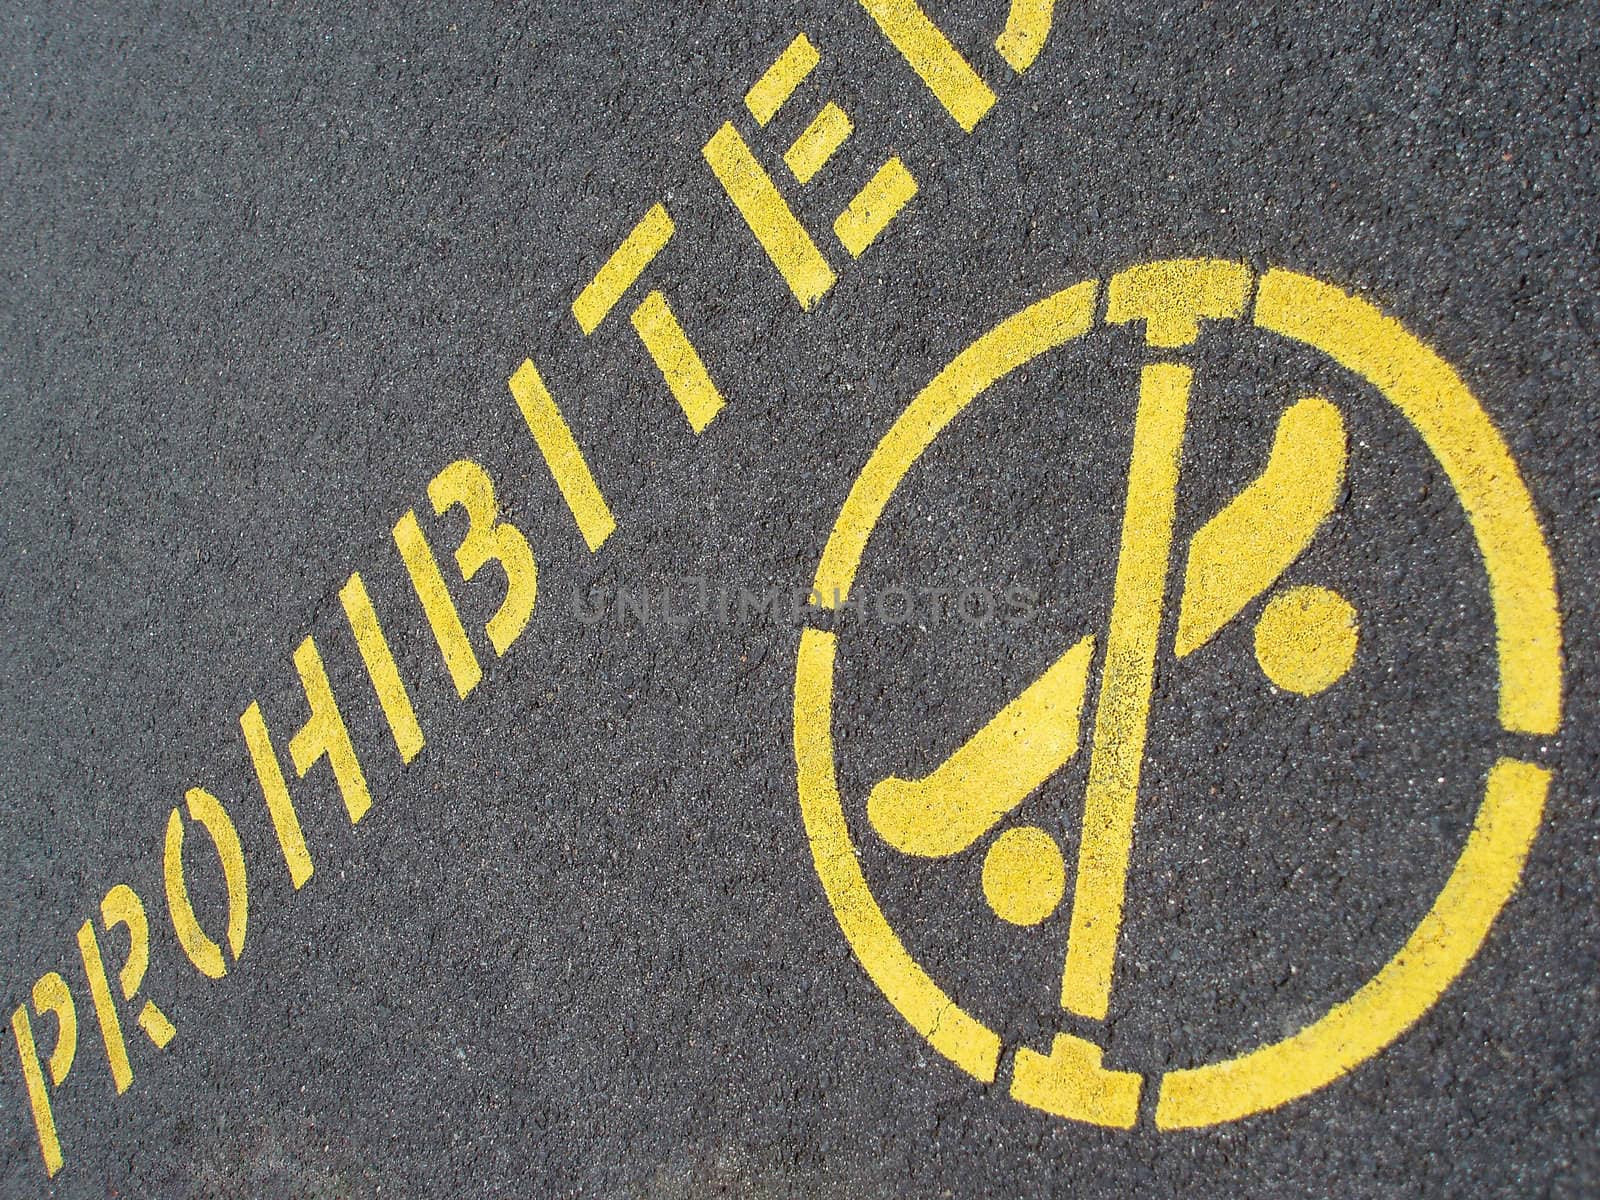 skateboarding prohibited sign on a tarmac pavement